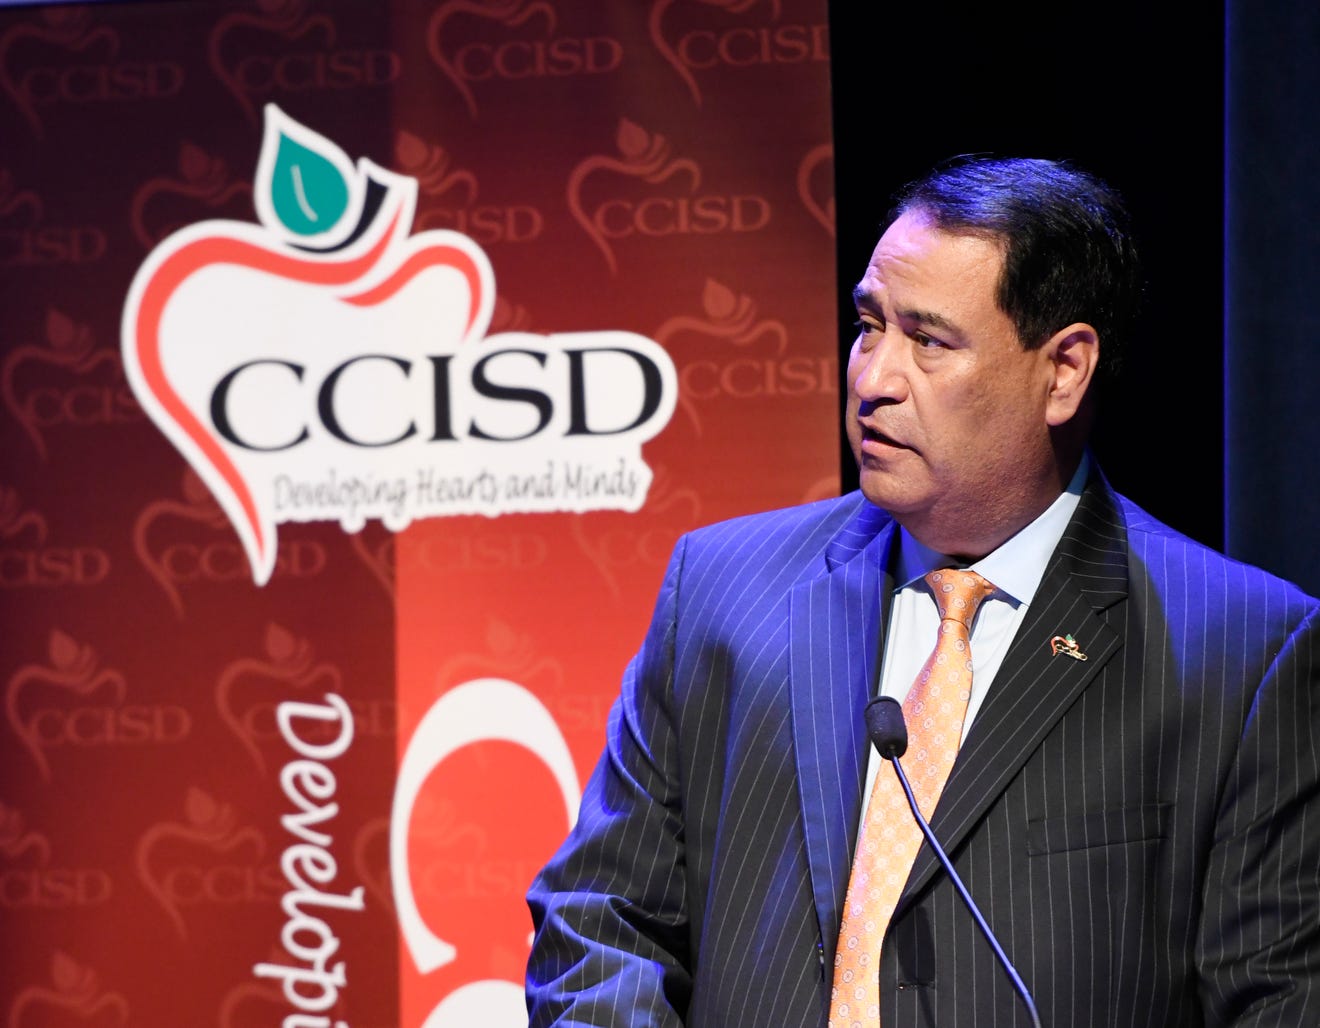 ccisd-prepares-to-welcome-students-back-to-campus-next-school-year